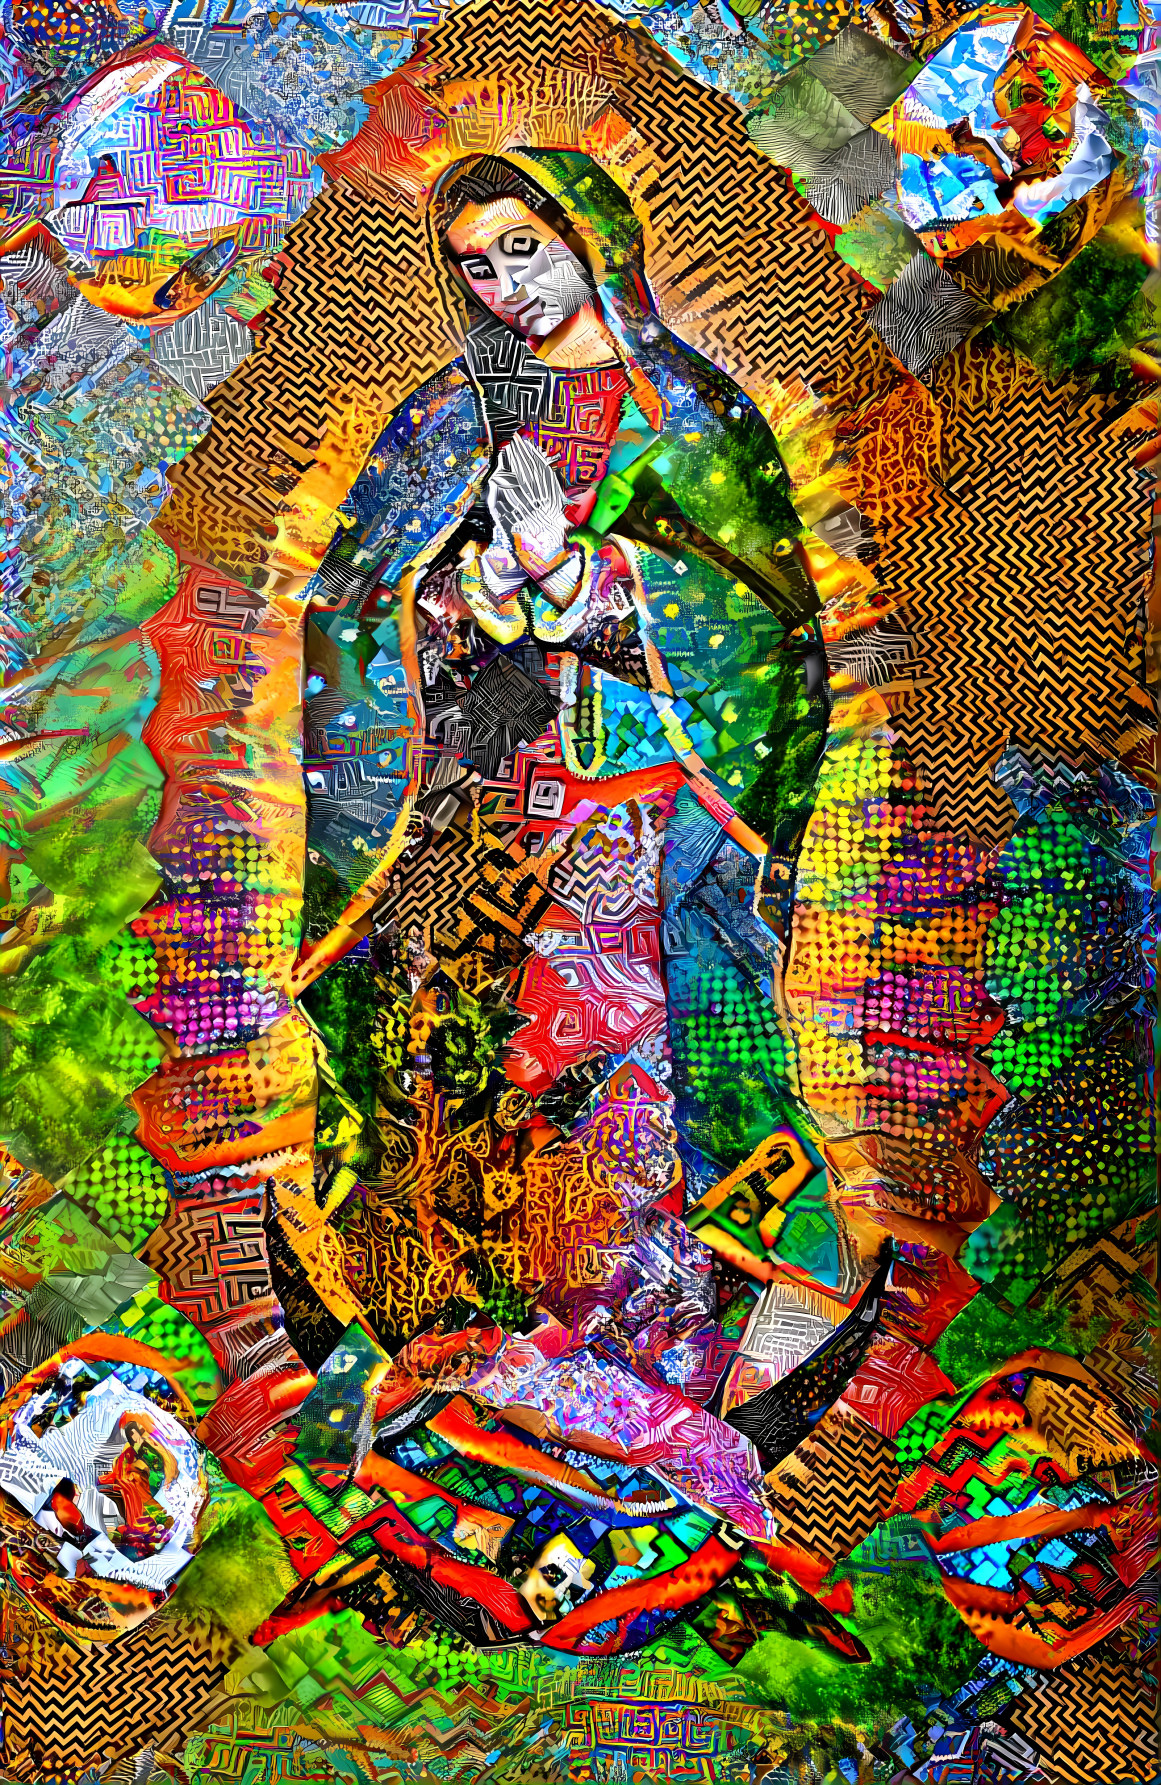 Our Lady of Guadalupe (بانوی ما در گوادالوپ)